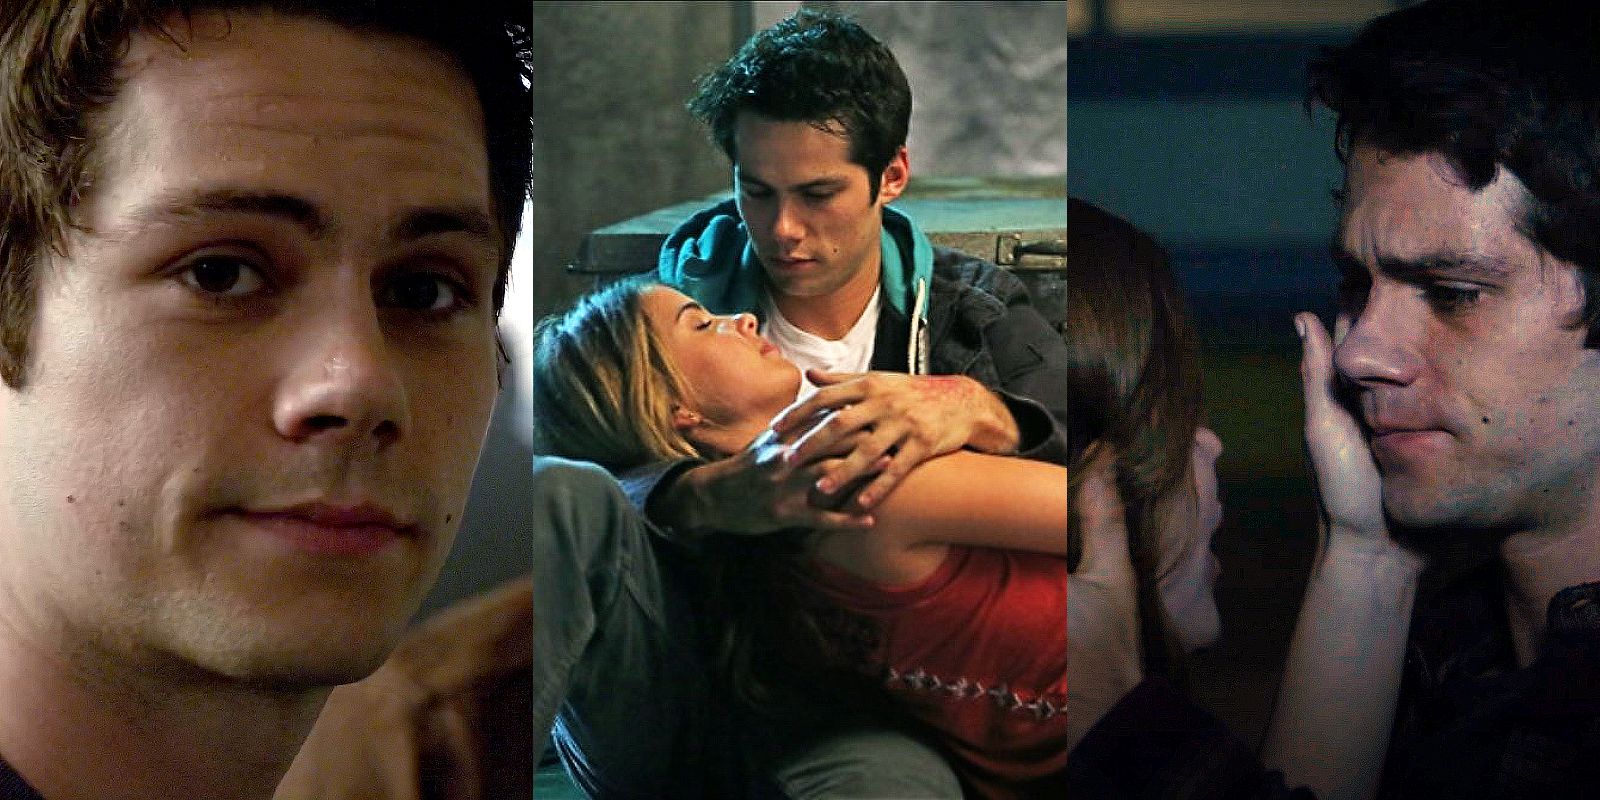 Split image of Stiles looking at Lydia, Stiles holding Malia, and Stiles and Lydia holding each other's faces in Teen Wolf.